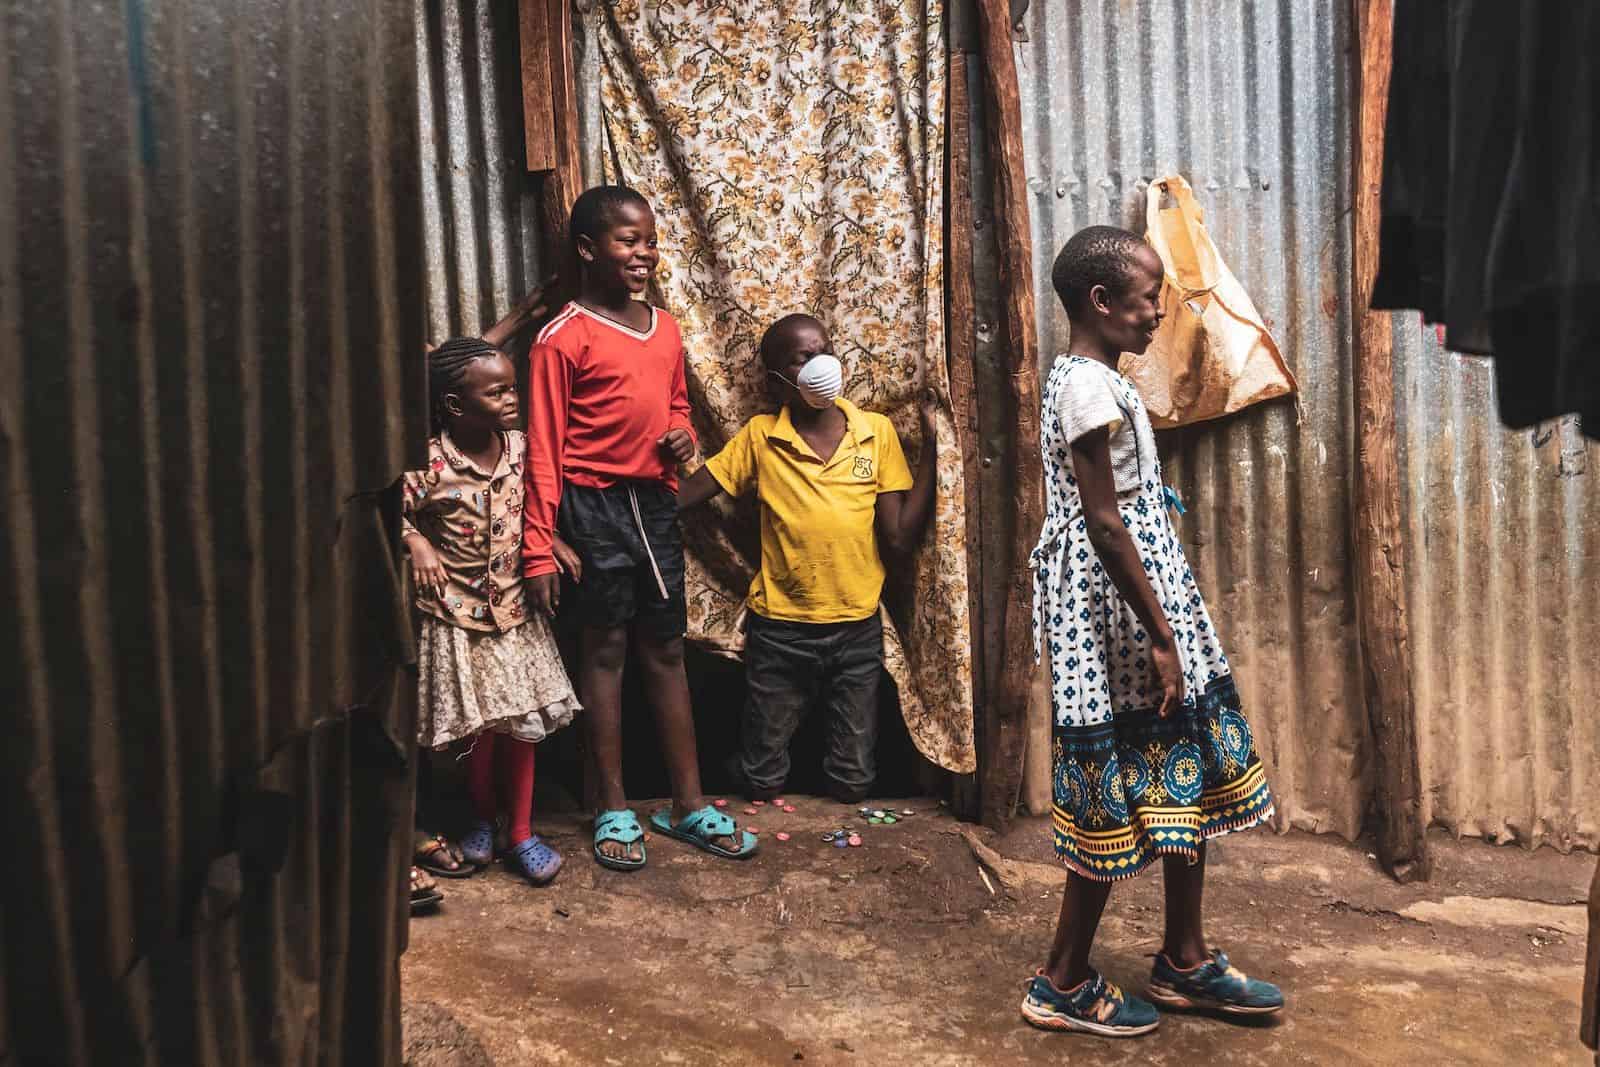 Four children stand in a slum in Kenya, where they are social distancing.